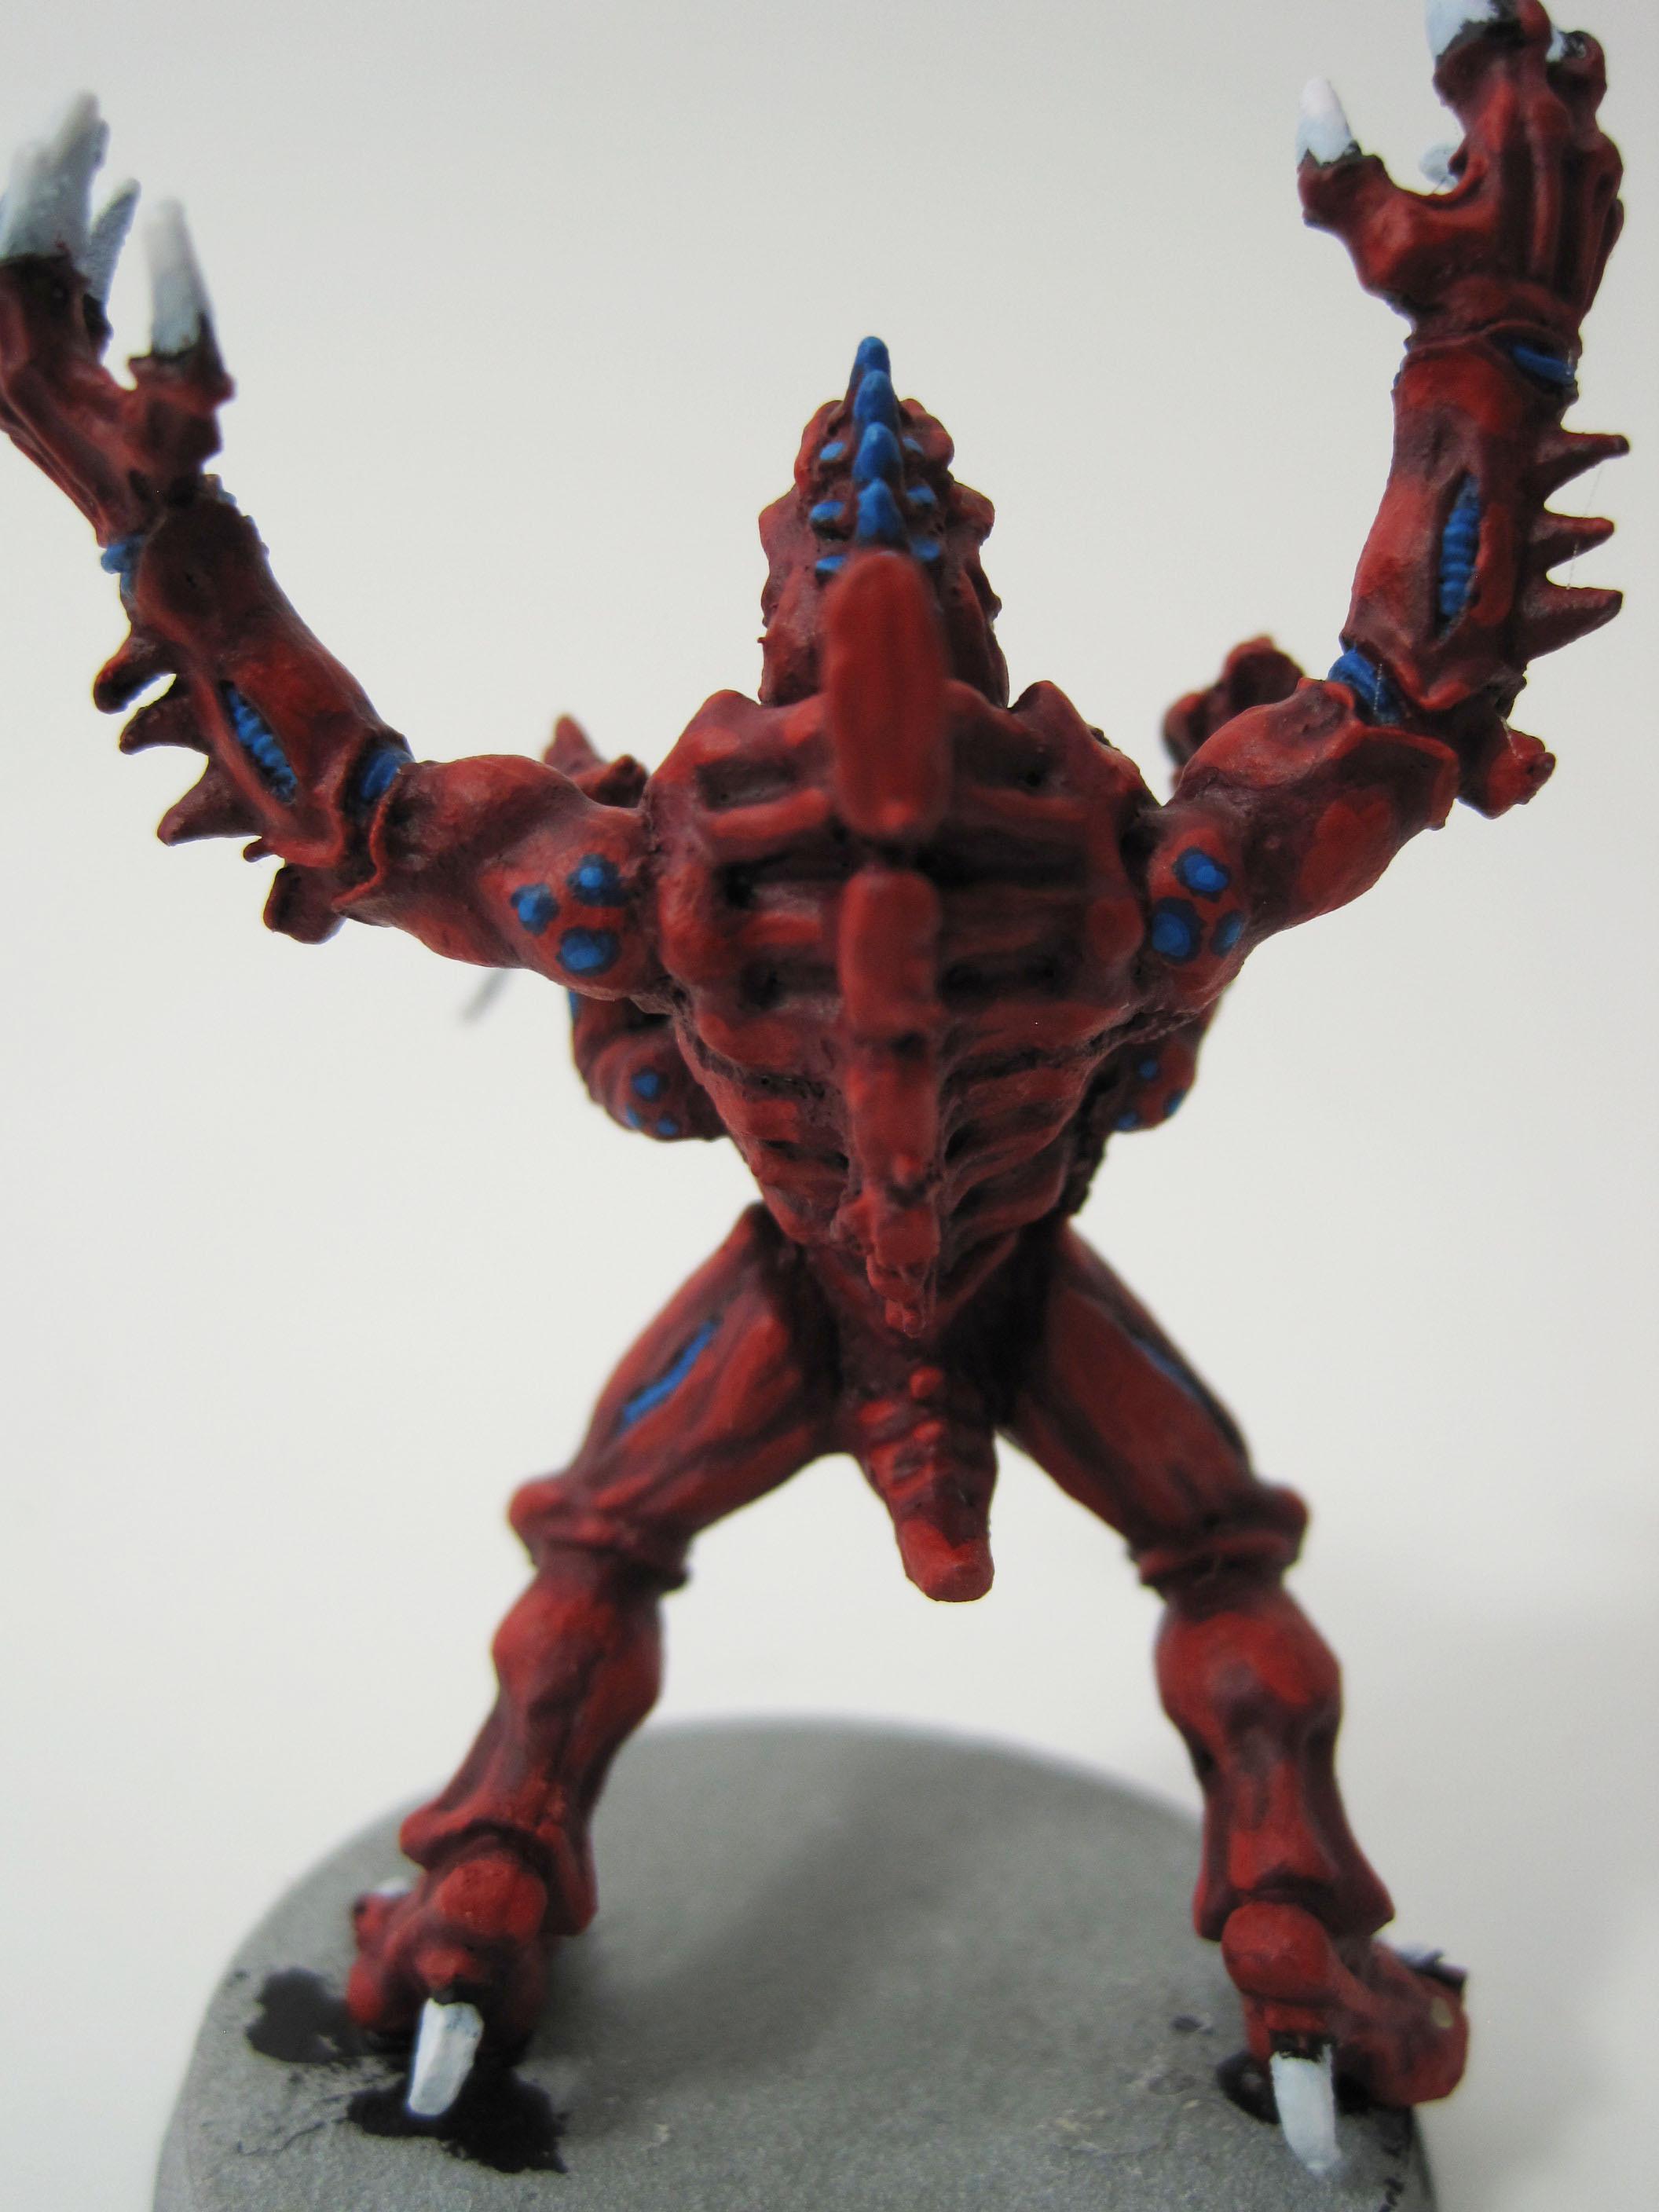 Blue, Broodlord, Kyogre, Red Broodlord, Red Carapace, Red Spots, Spot, Tyranids, White Claws